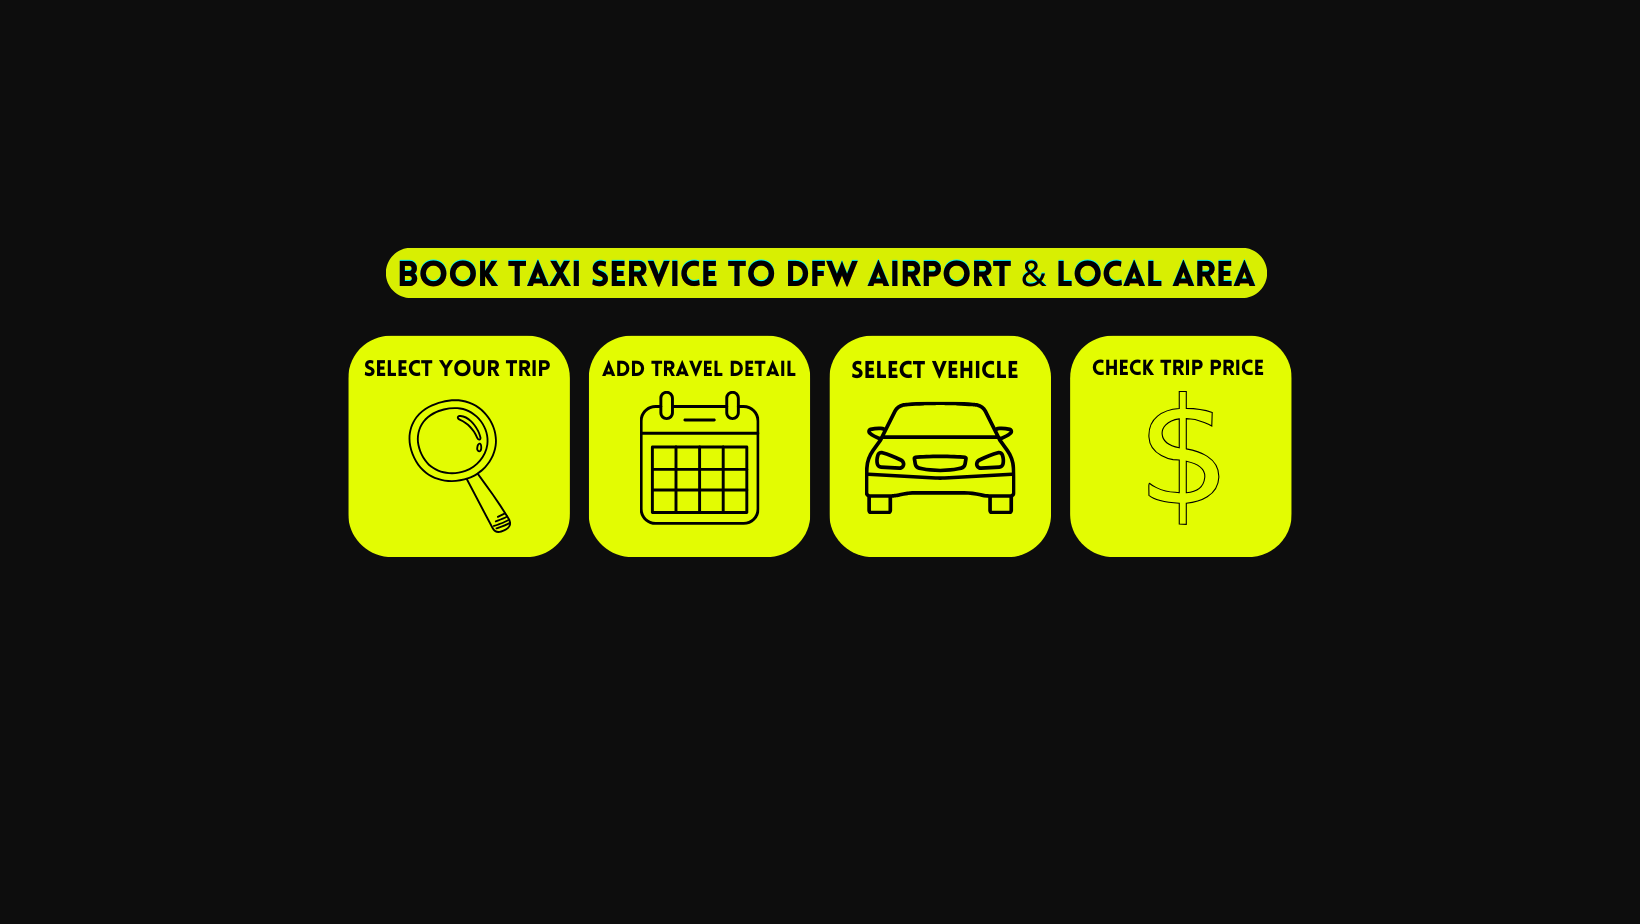 Taxi Service to DFW Airport & Local Area